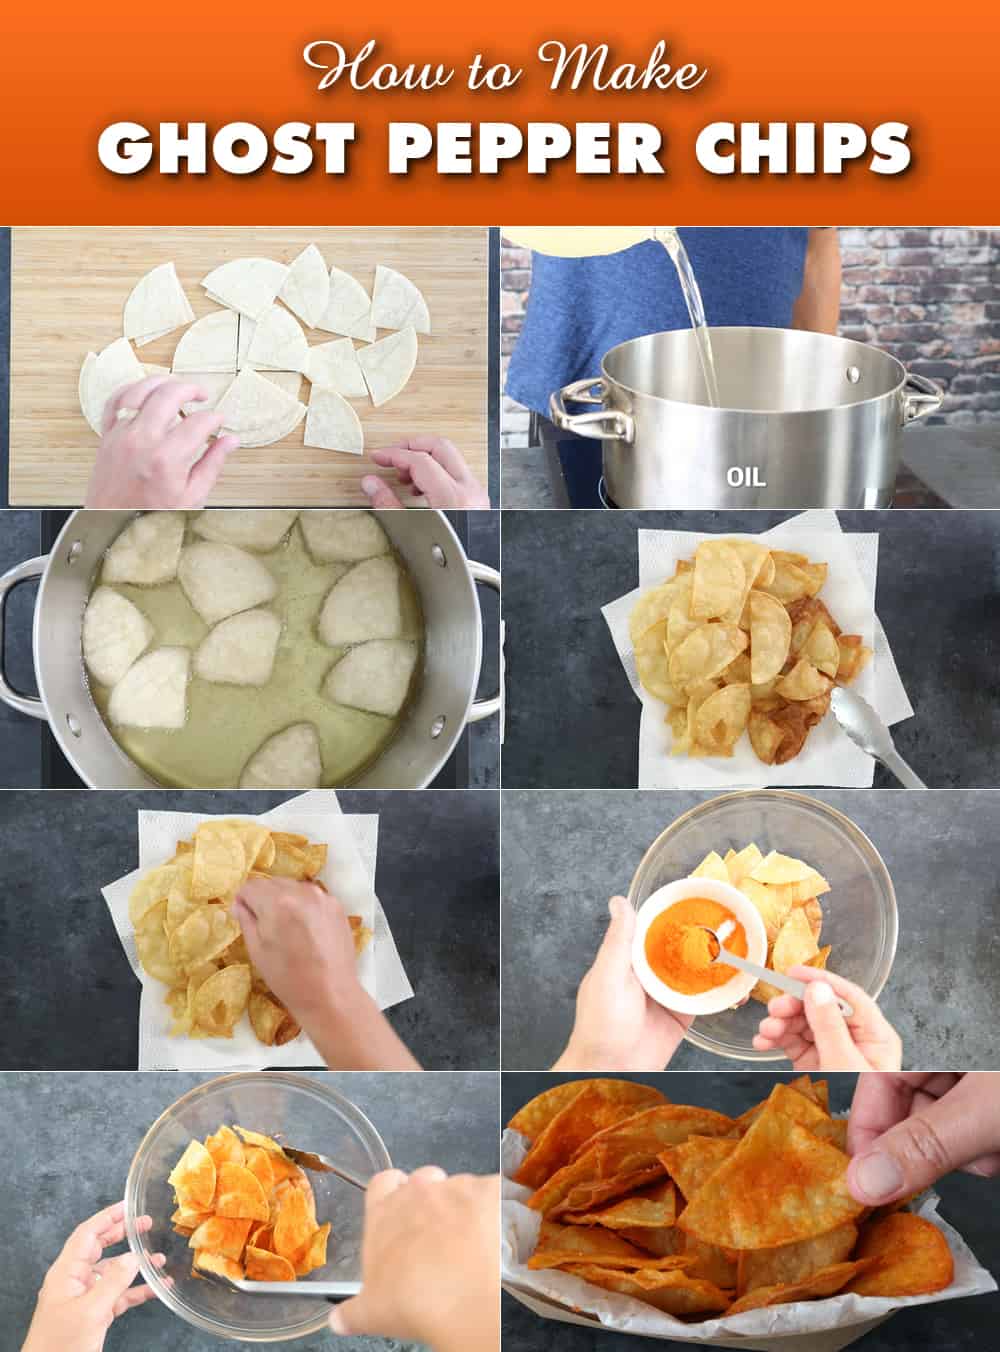 How to Make Ghost Pepper Chips